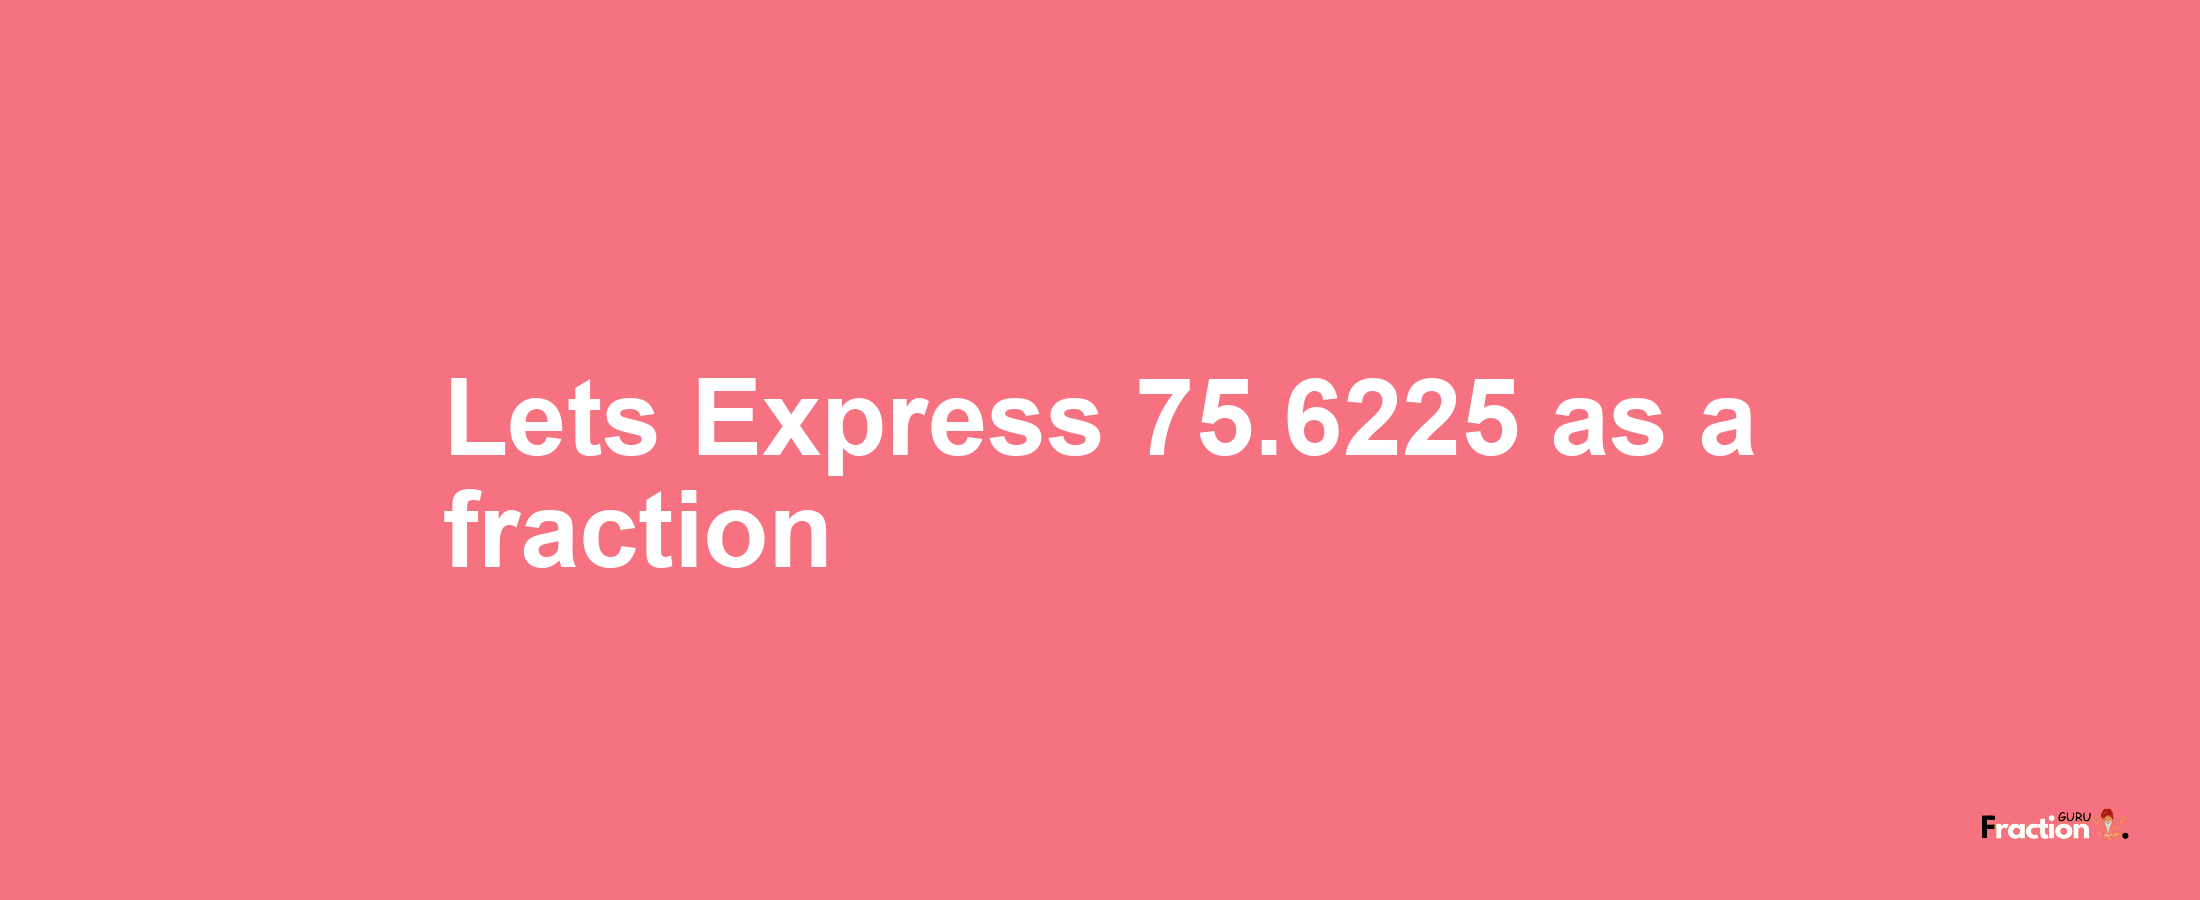 Lets Express 75.6225 as afraction